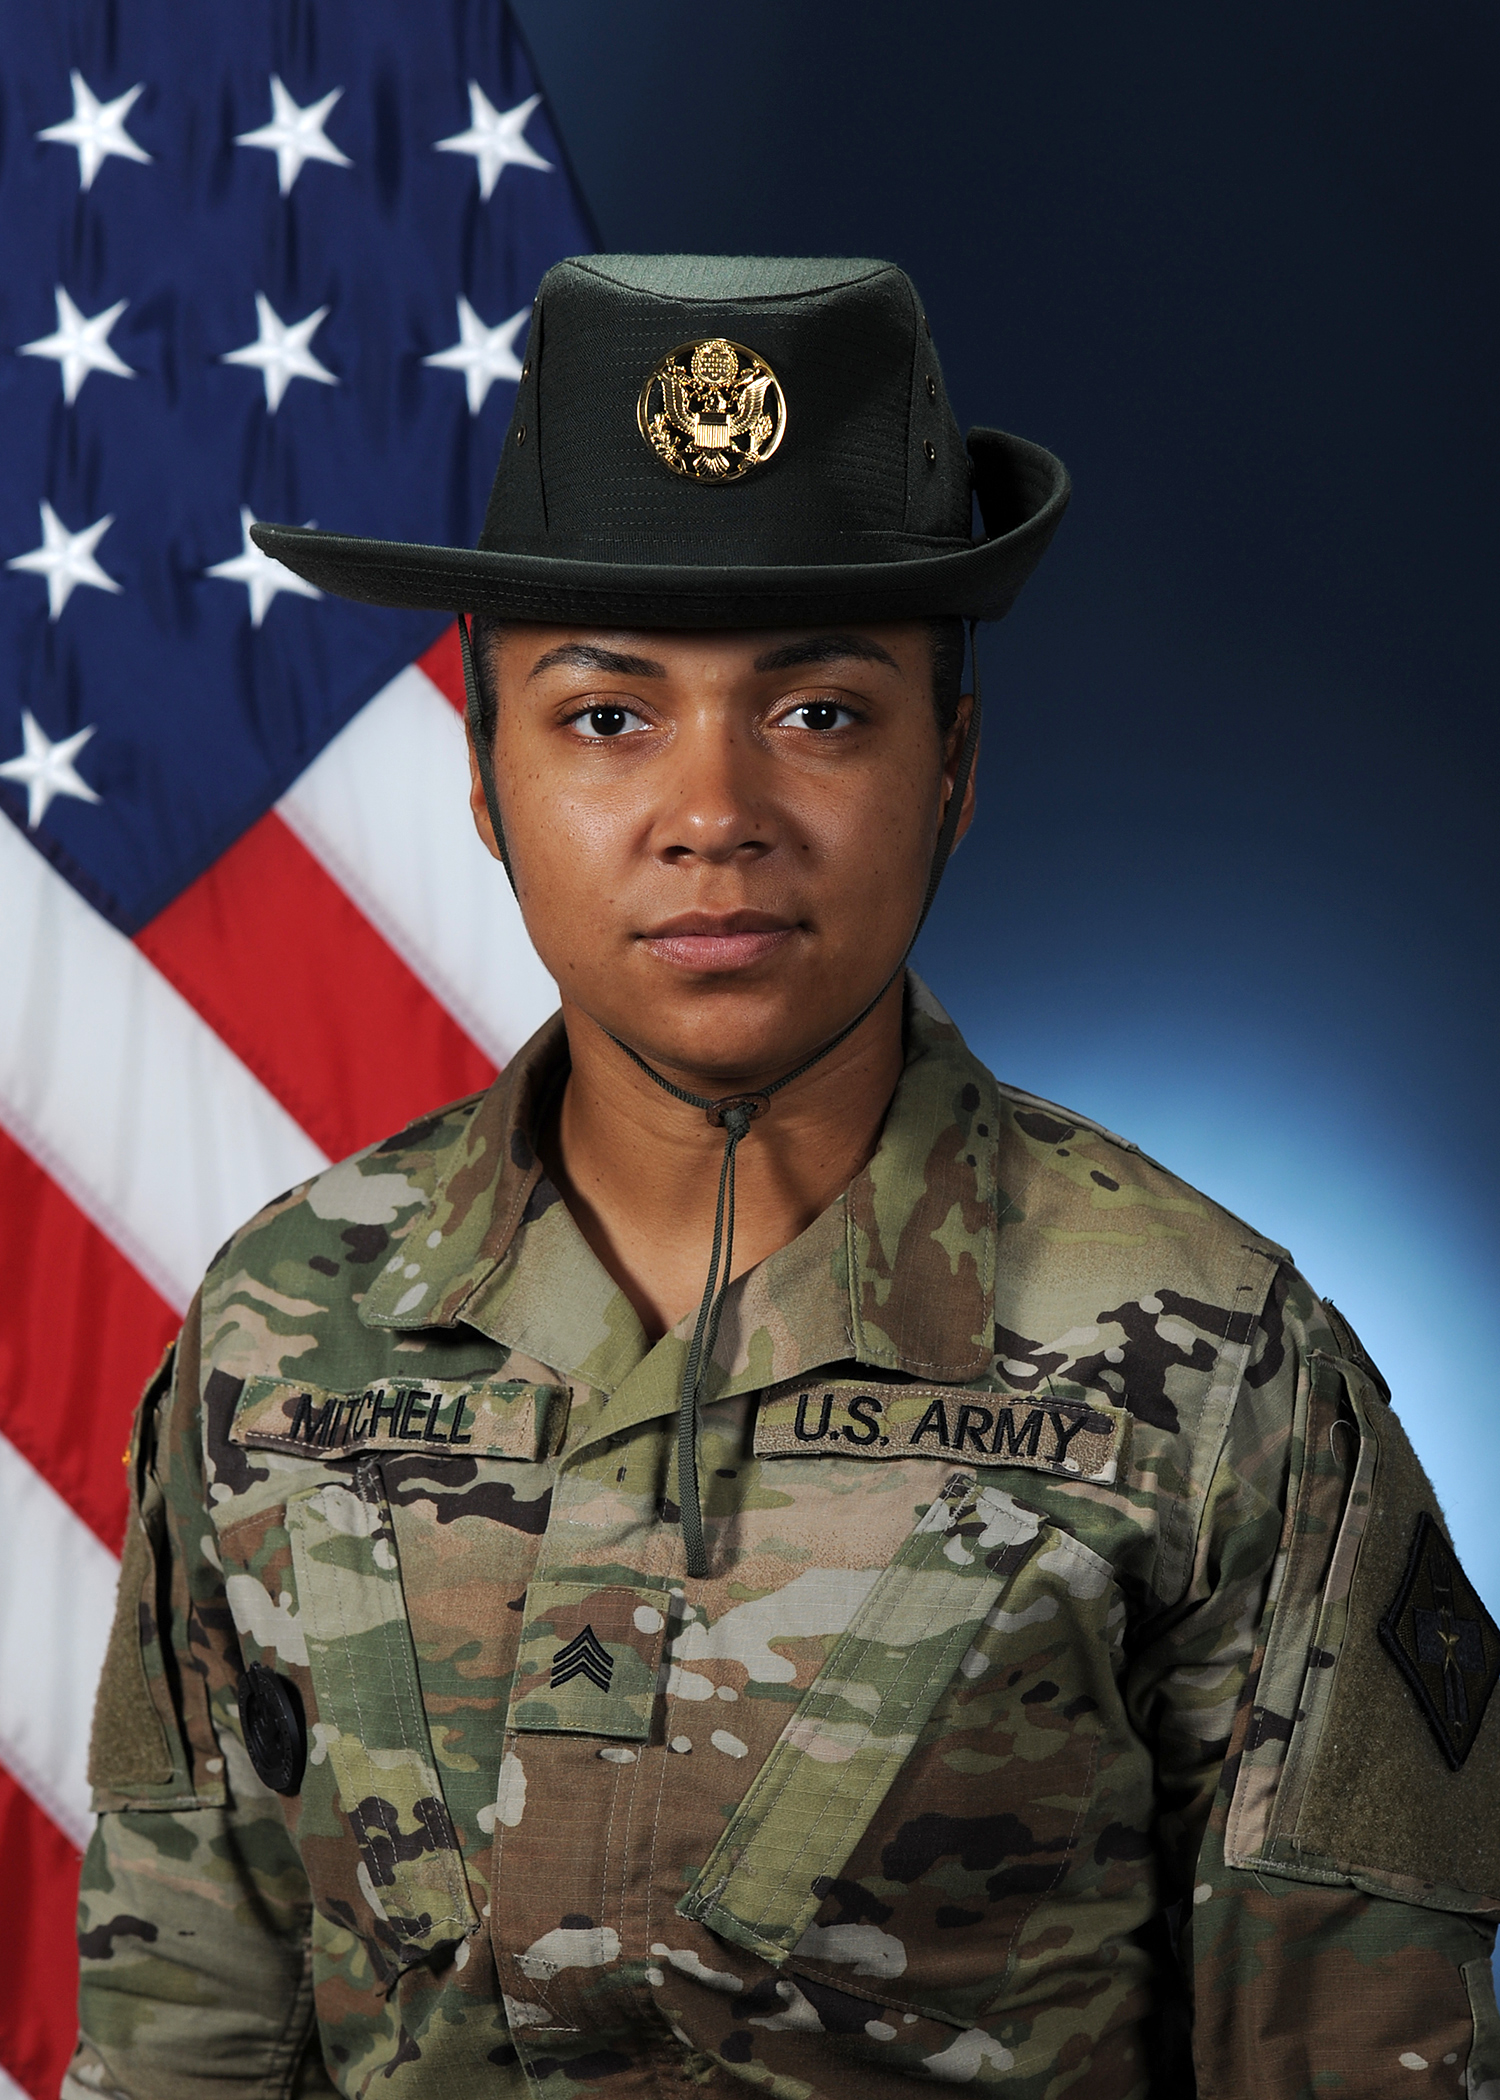 PHOTO: Staff Sergeant Jessica Mitchell is seen in this undated photo.